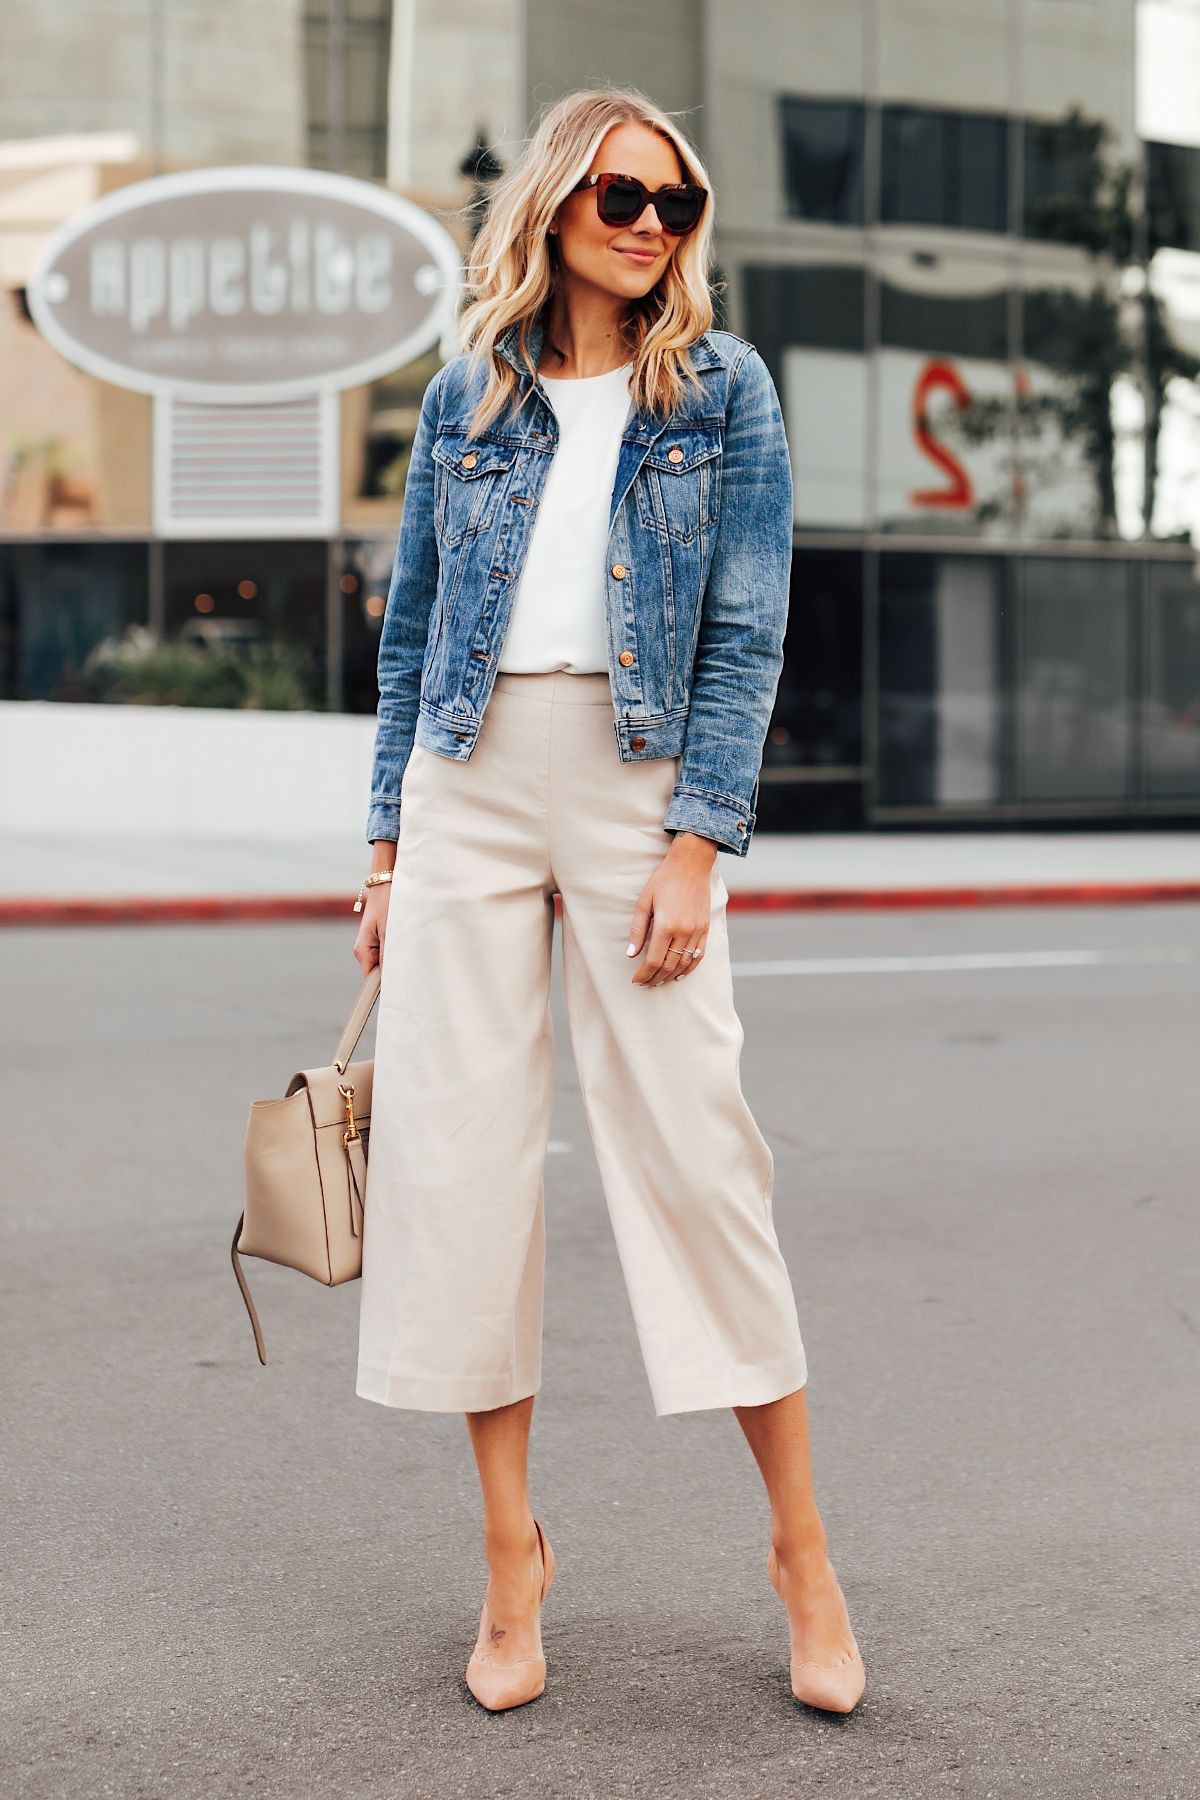 HOW TO STYLE CAPRI AND CROPPED PANTS  Style Clinic